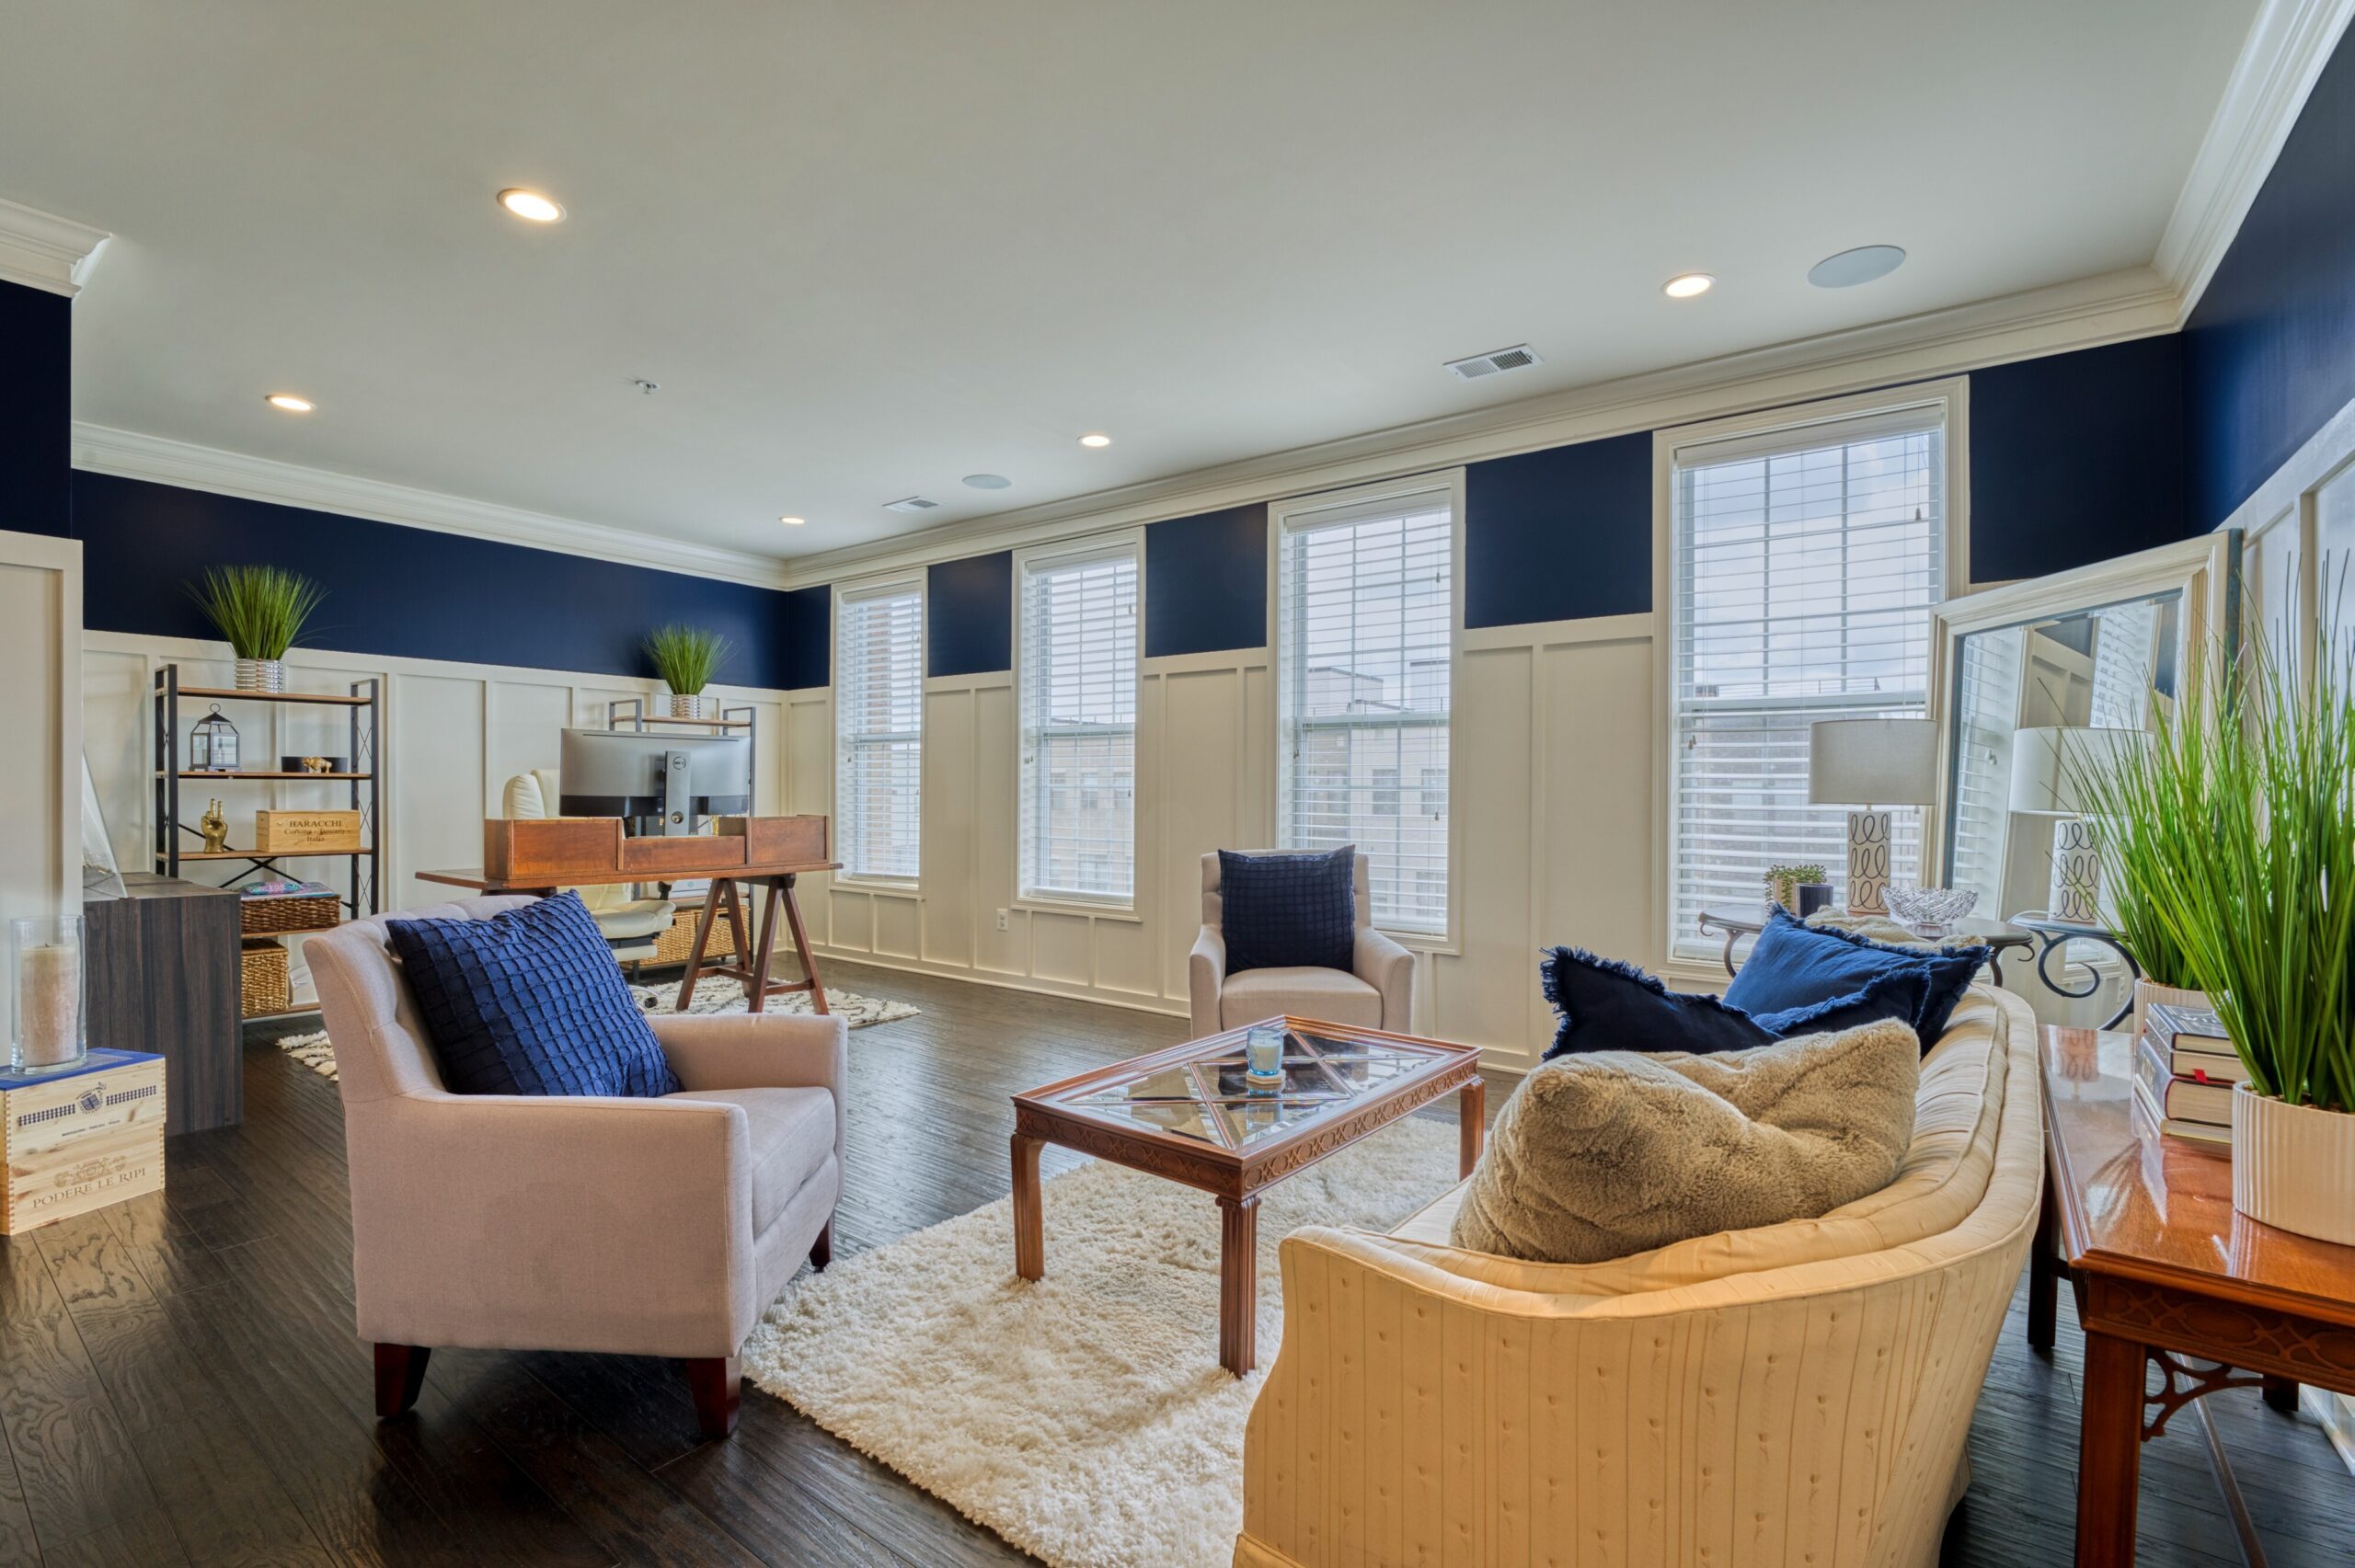 Professional interior photo of 23560 Buckland Farm Ter, Ashburn, VA - Showing the living and office room with white wainscoting against white walls bordered by deep blue around the top third of the wall over the wainscoting